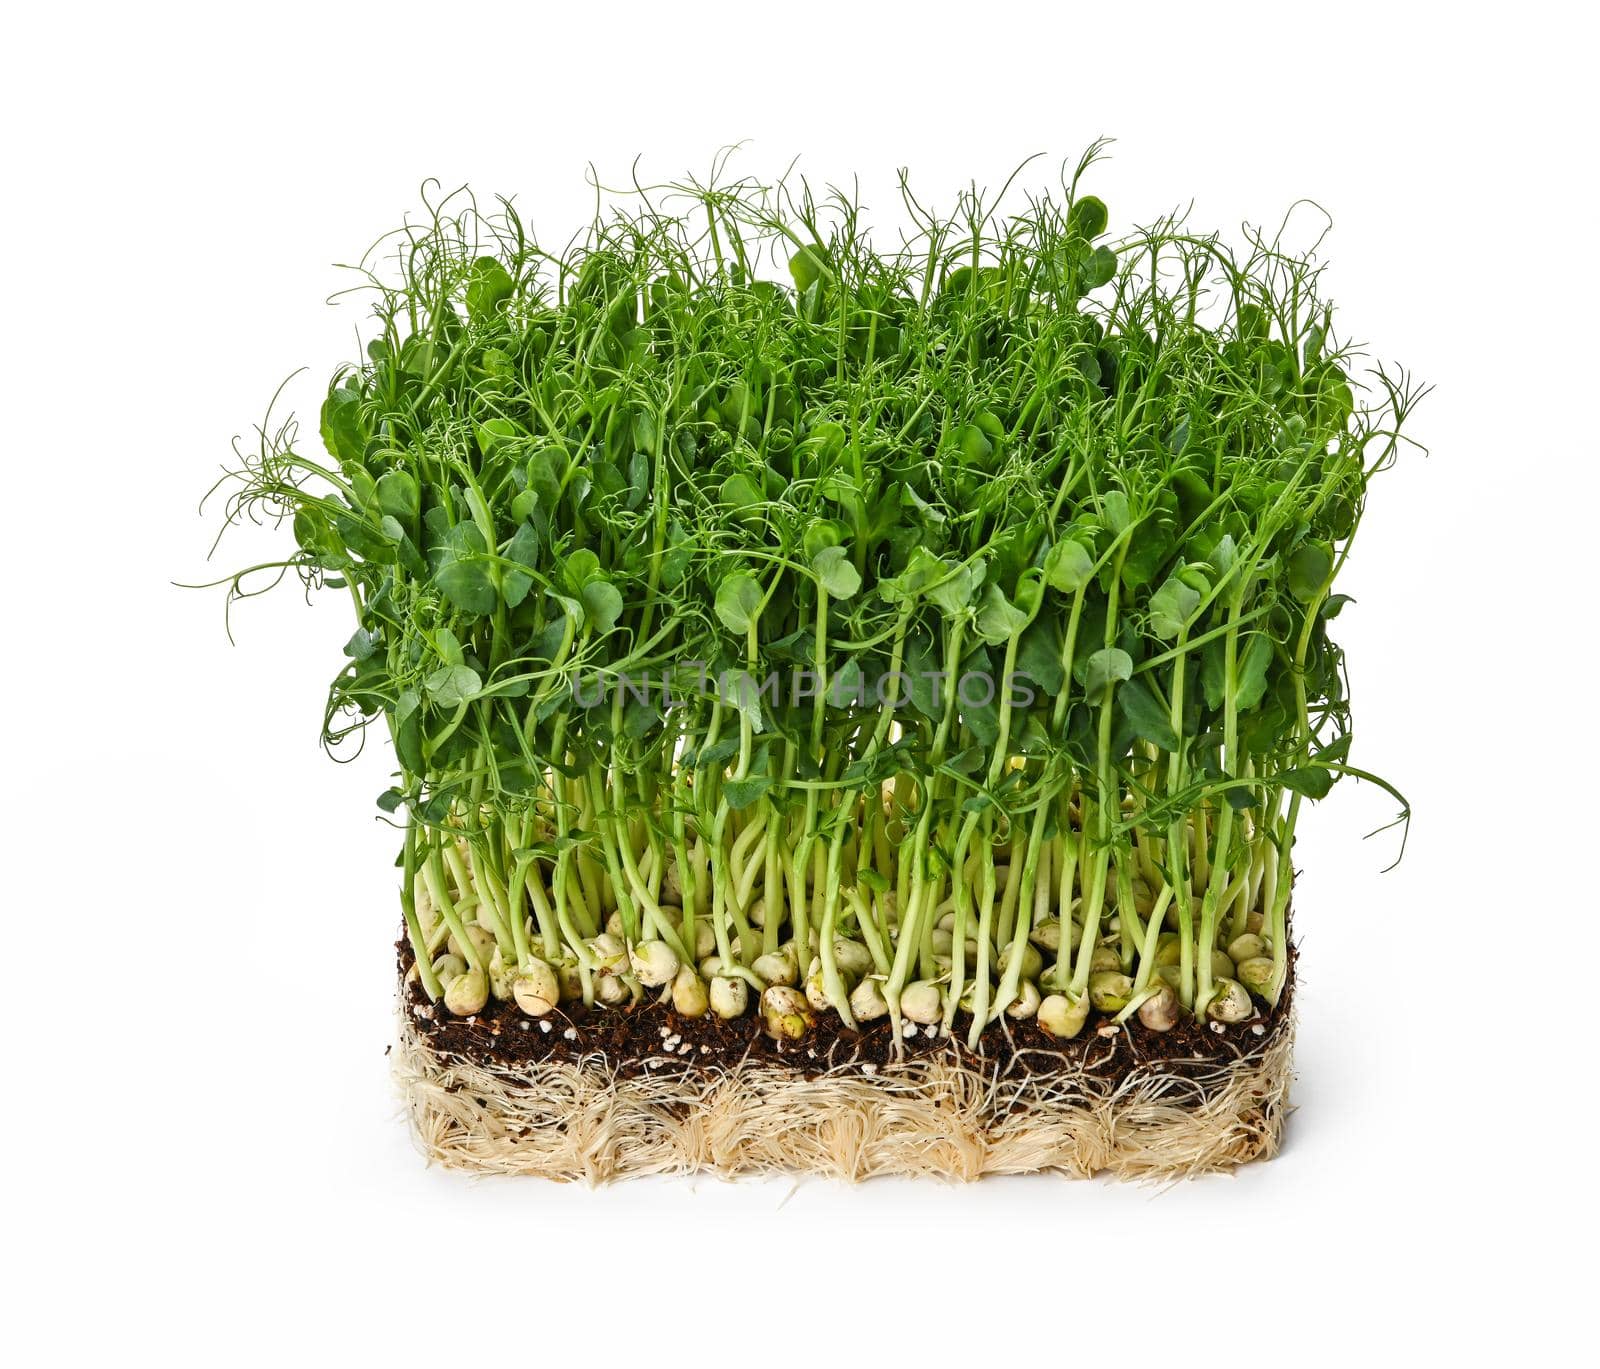 Close up fresh green peas microgreen sprouts on drainage compost isolated on white background, high angle view